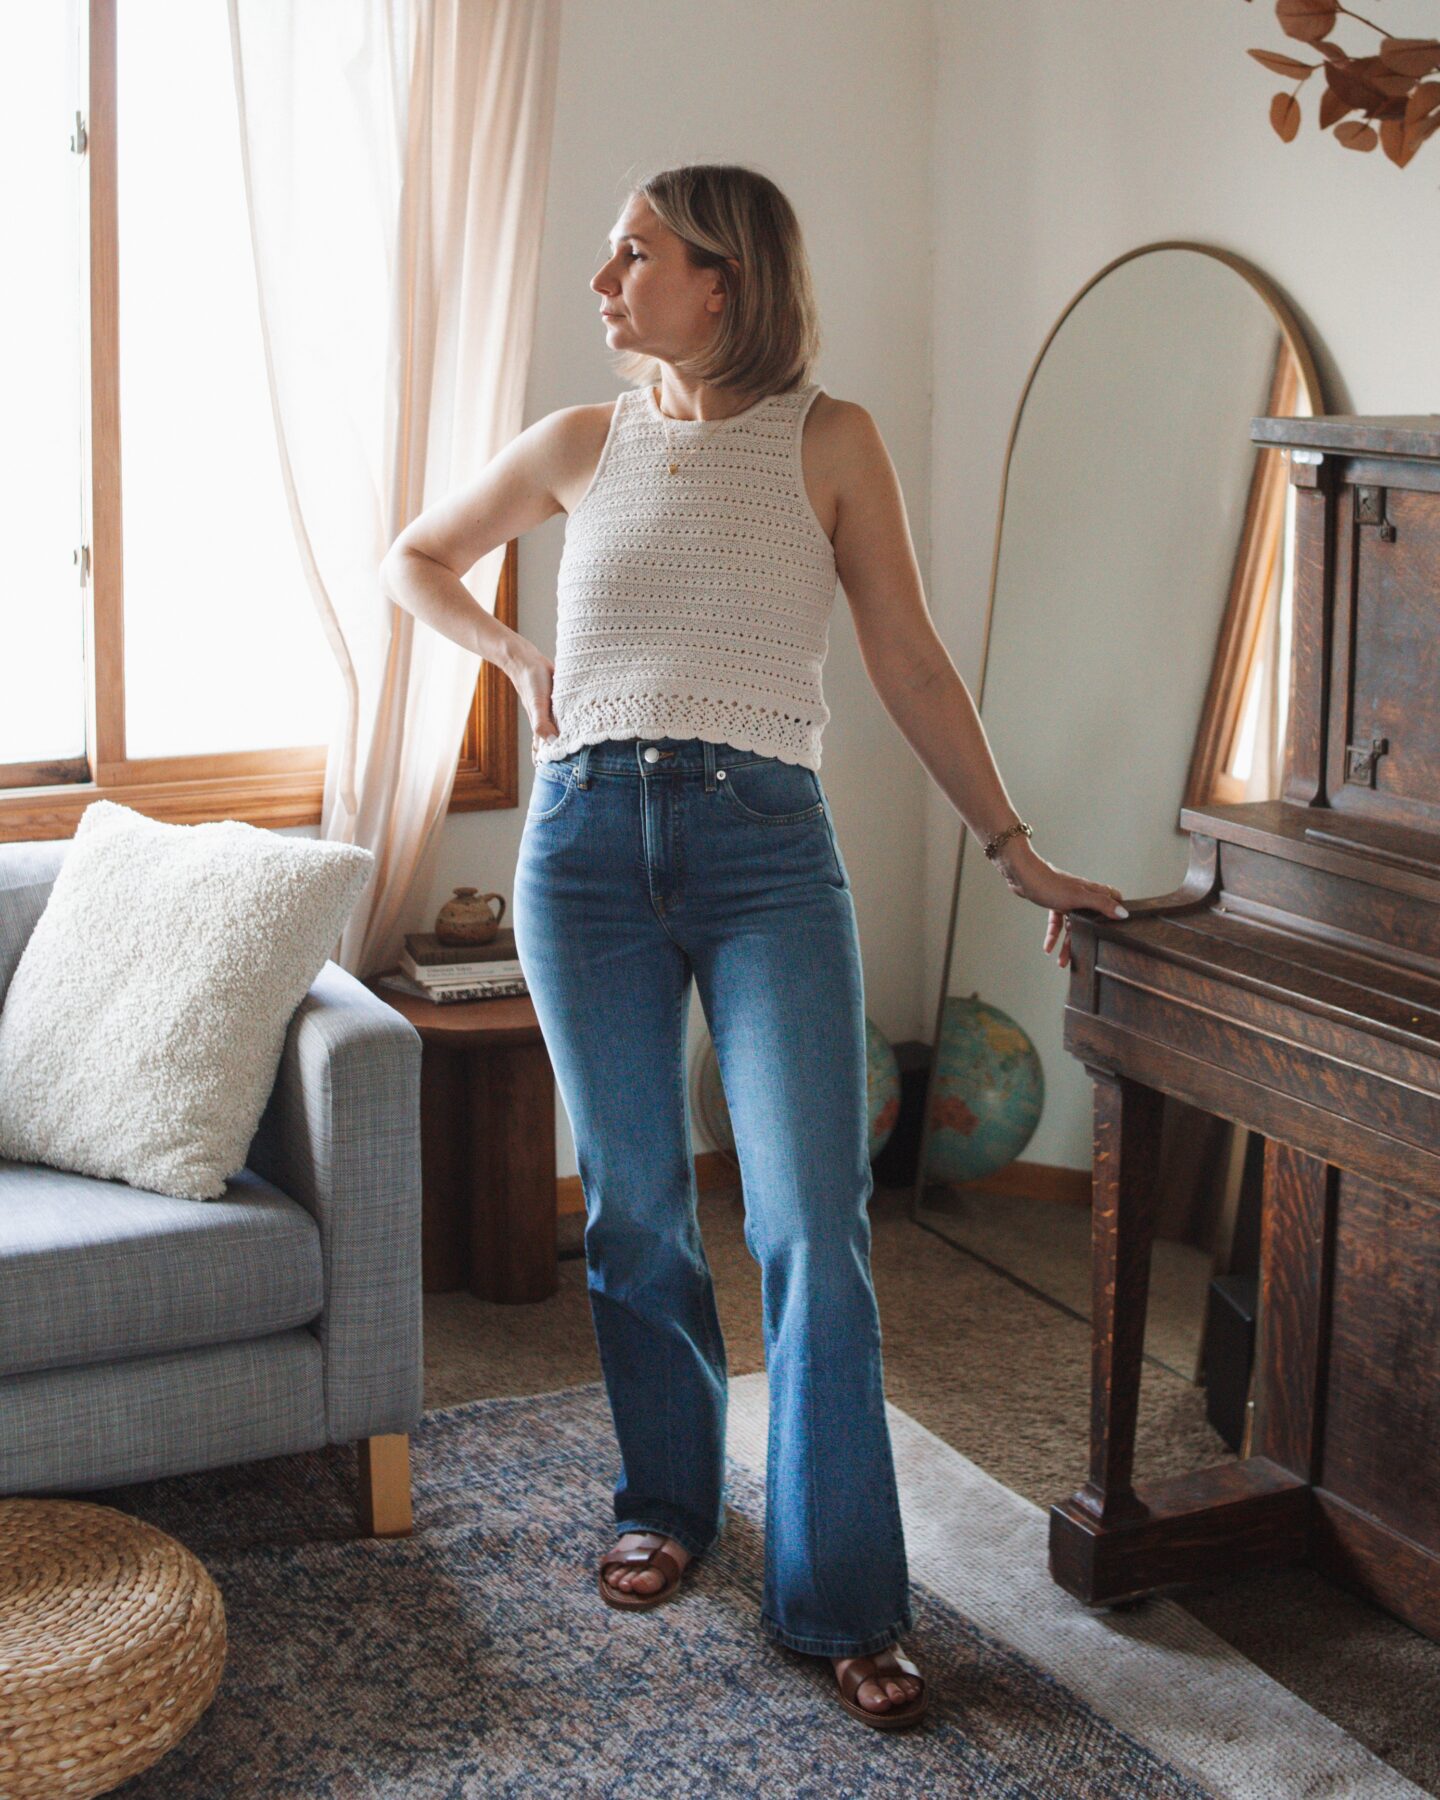 Karin Emily wears the new Everlane flare denim while standing in her living room